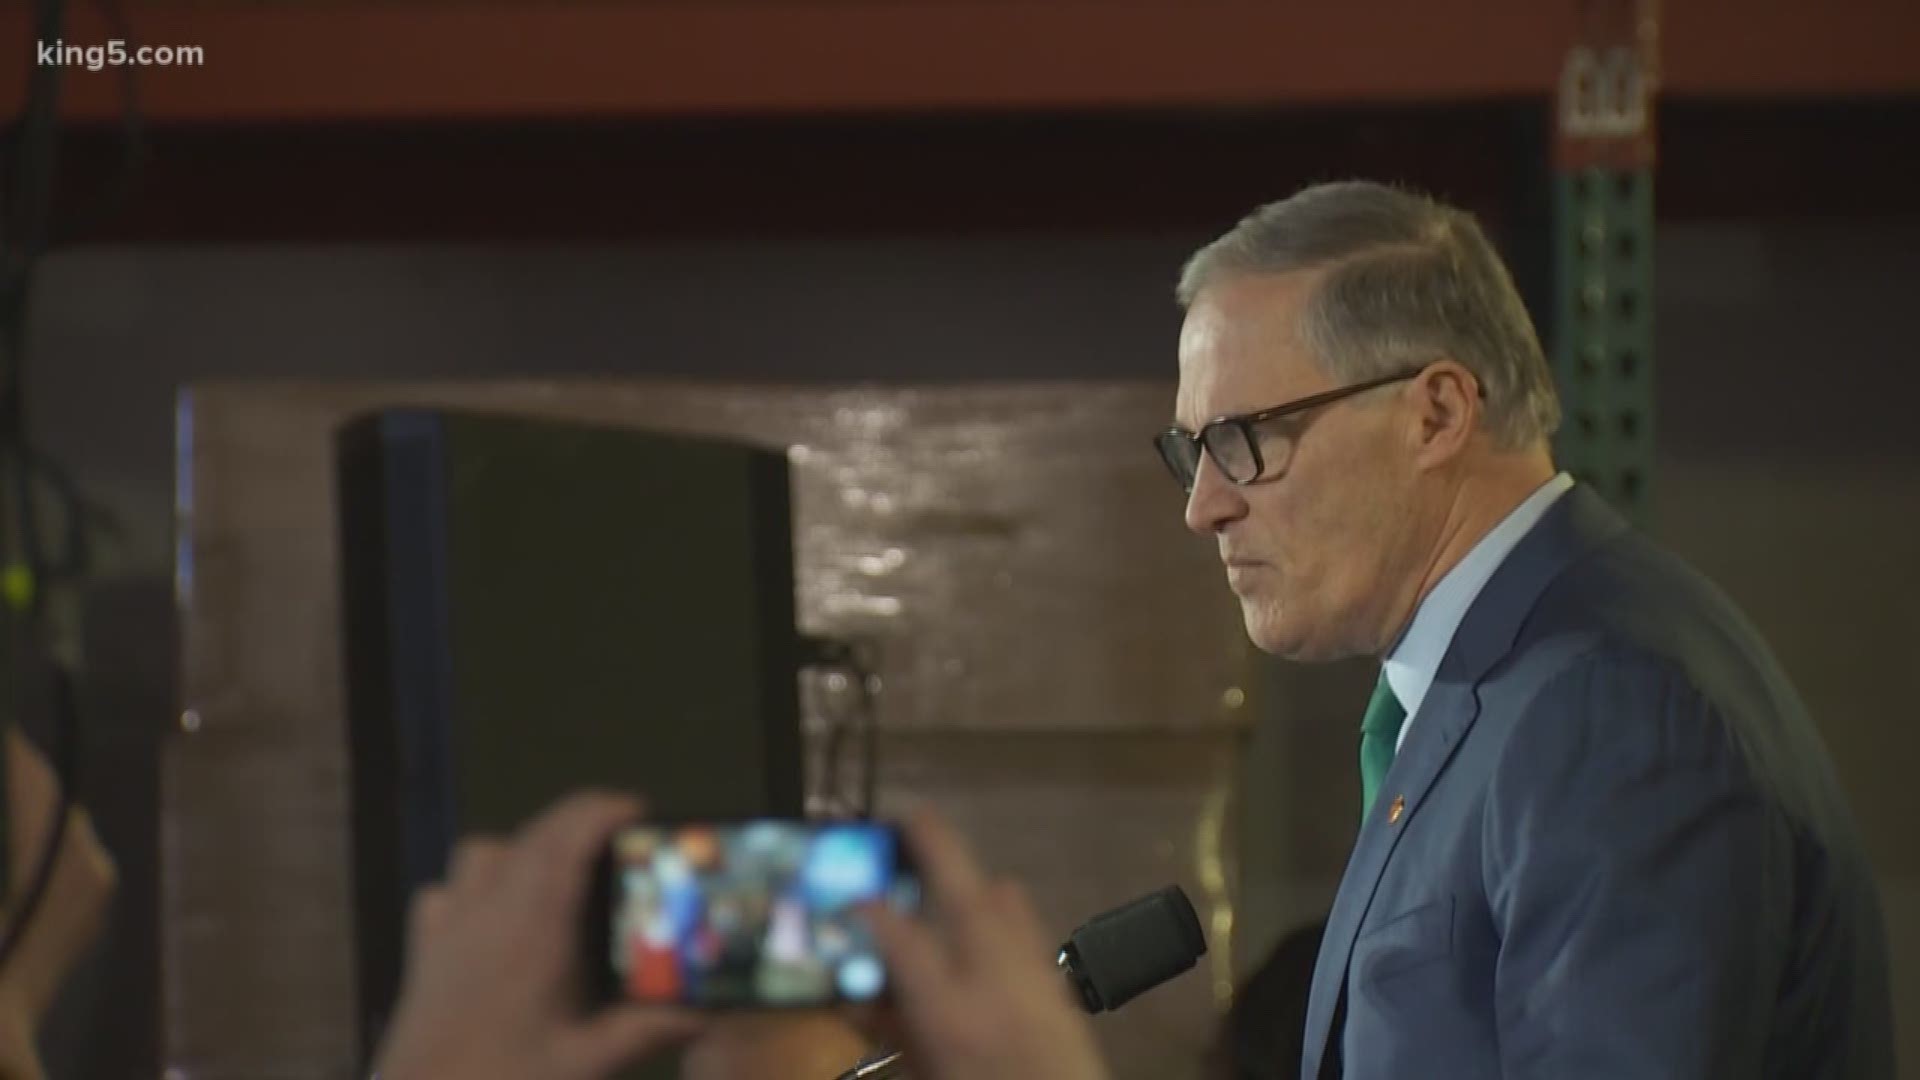 Jay Inslee announces he's running for president. KING 5's Chris Daniels was at that announcement and has the latest.